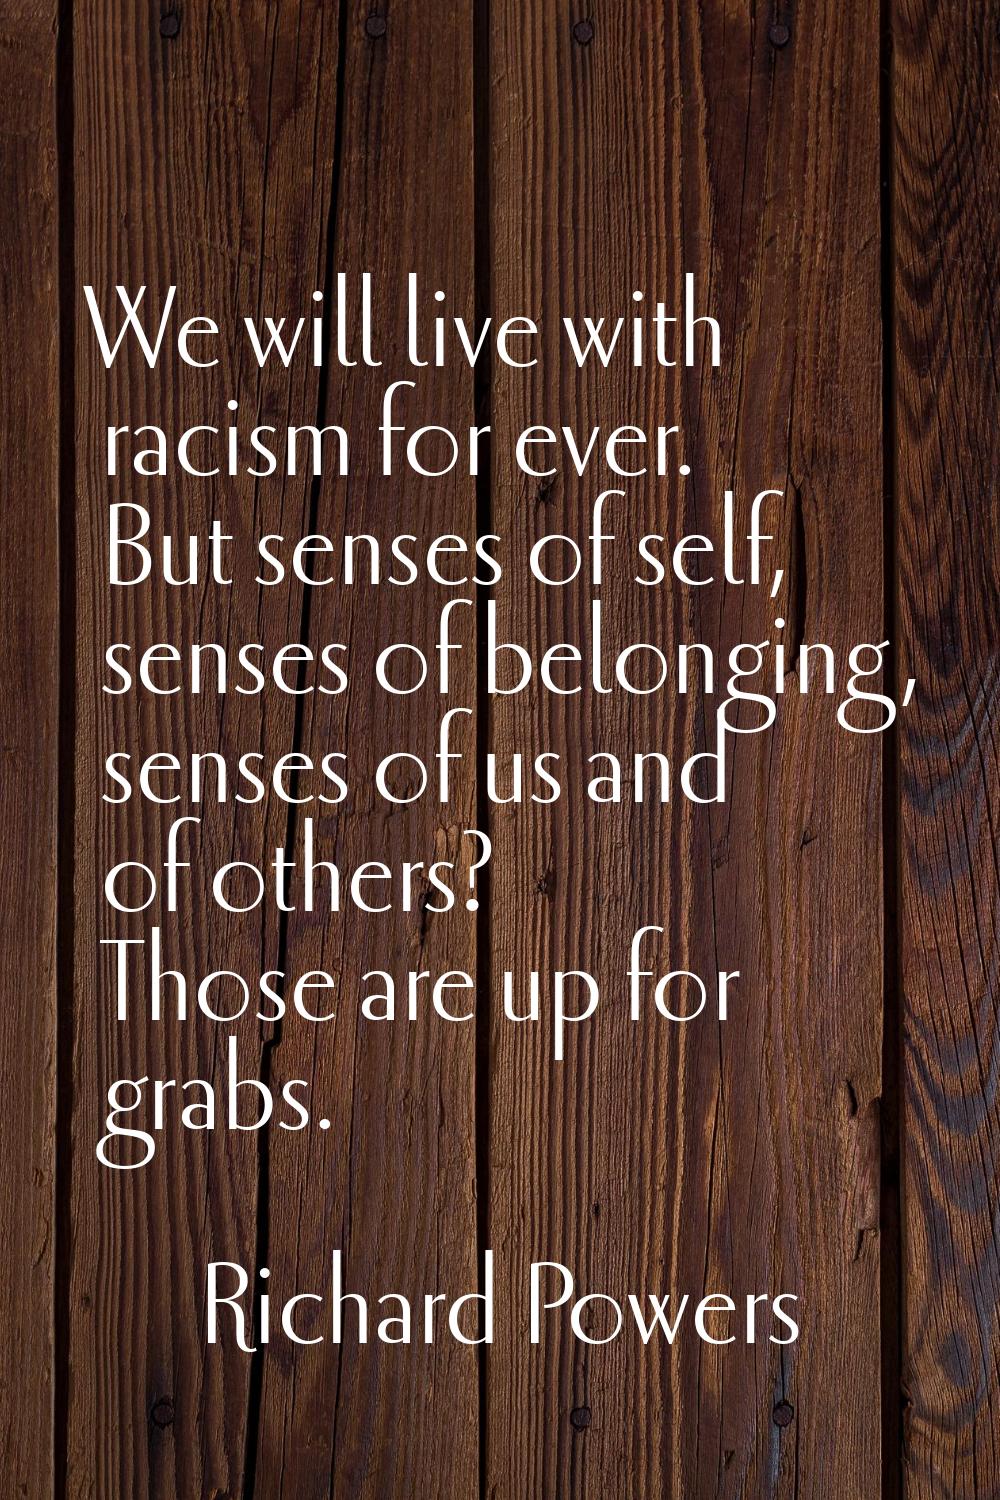 We will live with racism for ever. But senses of self, senses of belonging, senses of us and of oth